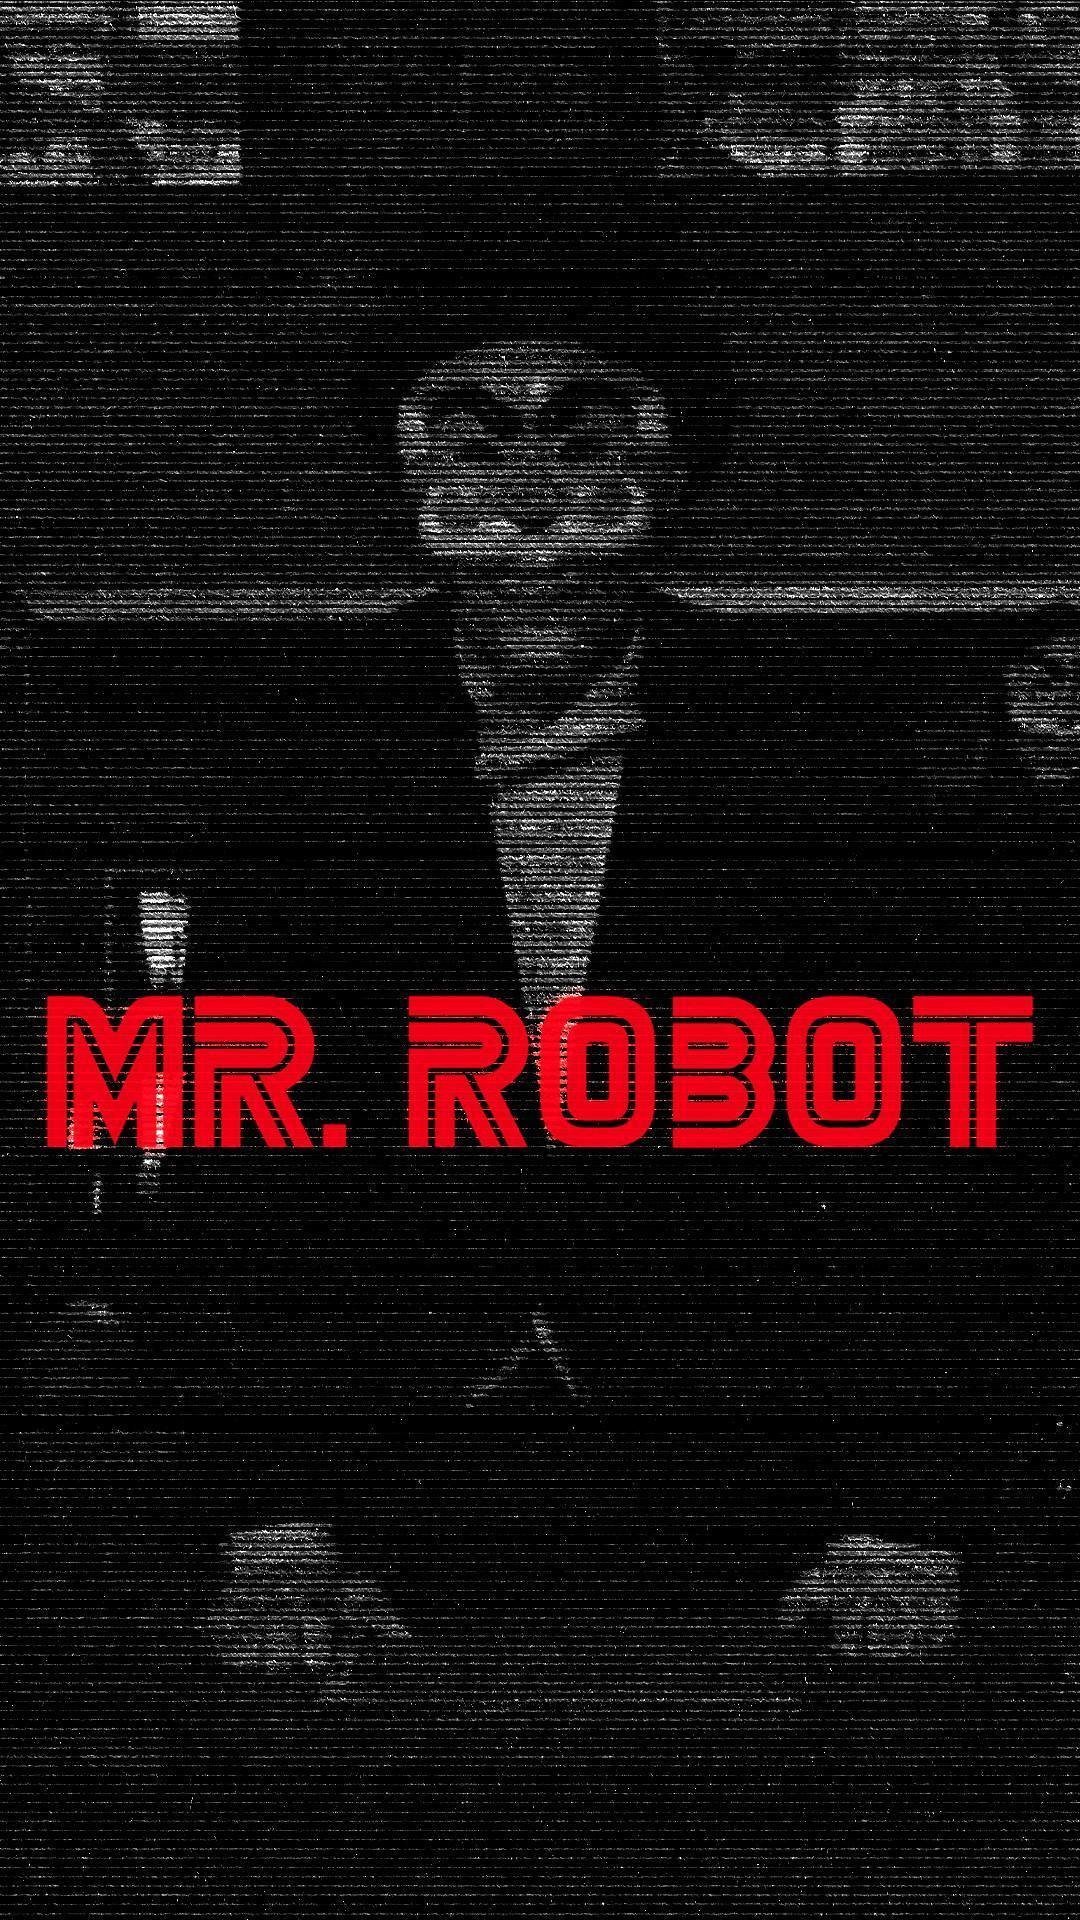 Mr Robot Wallpaper Android